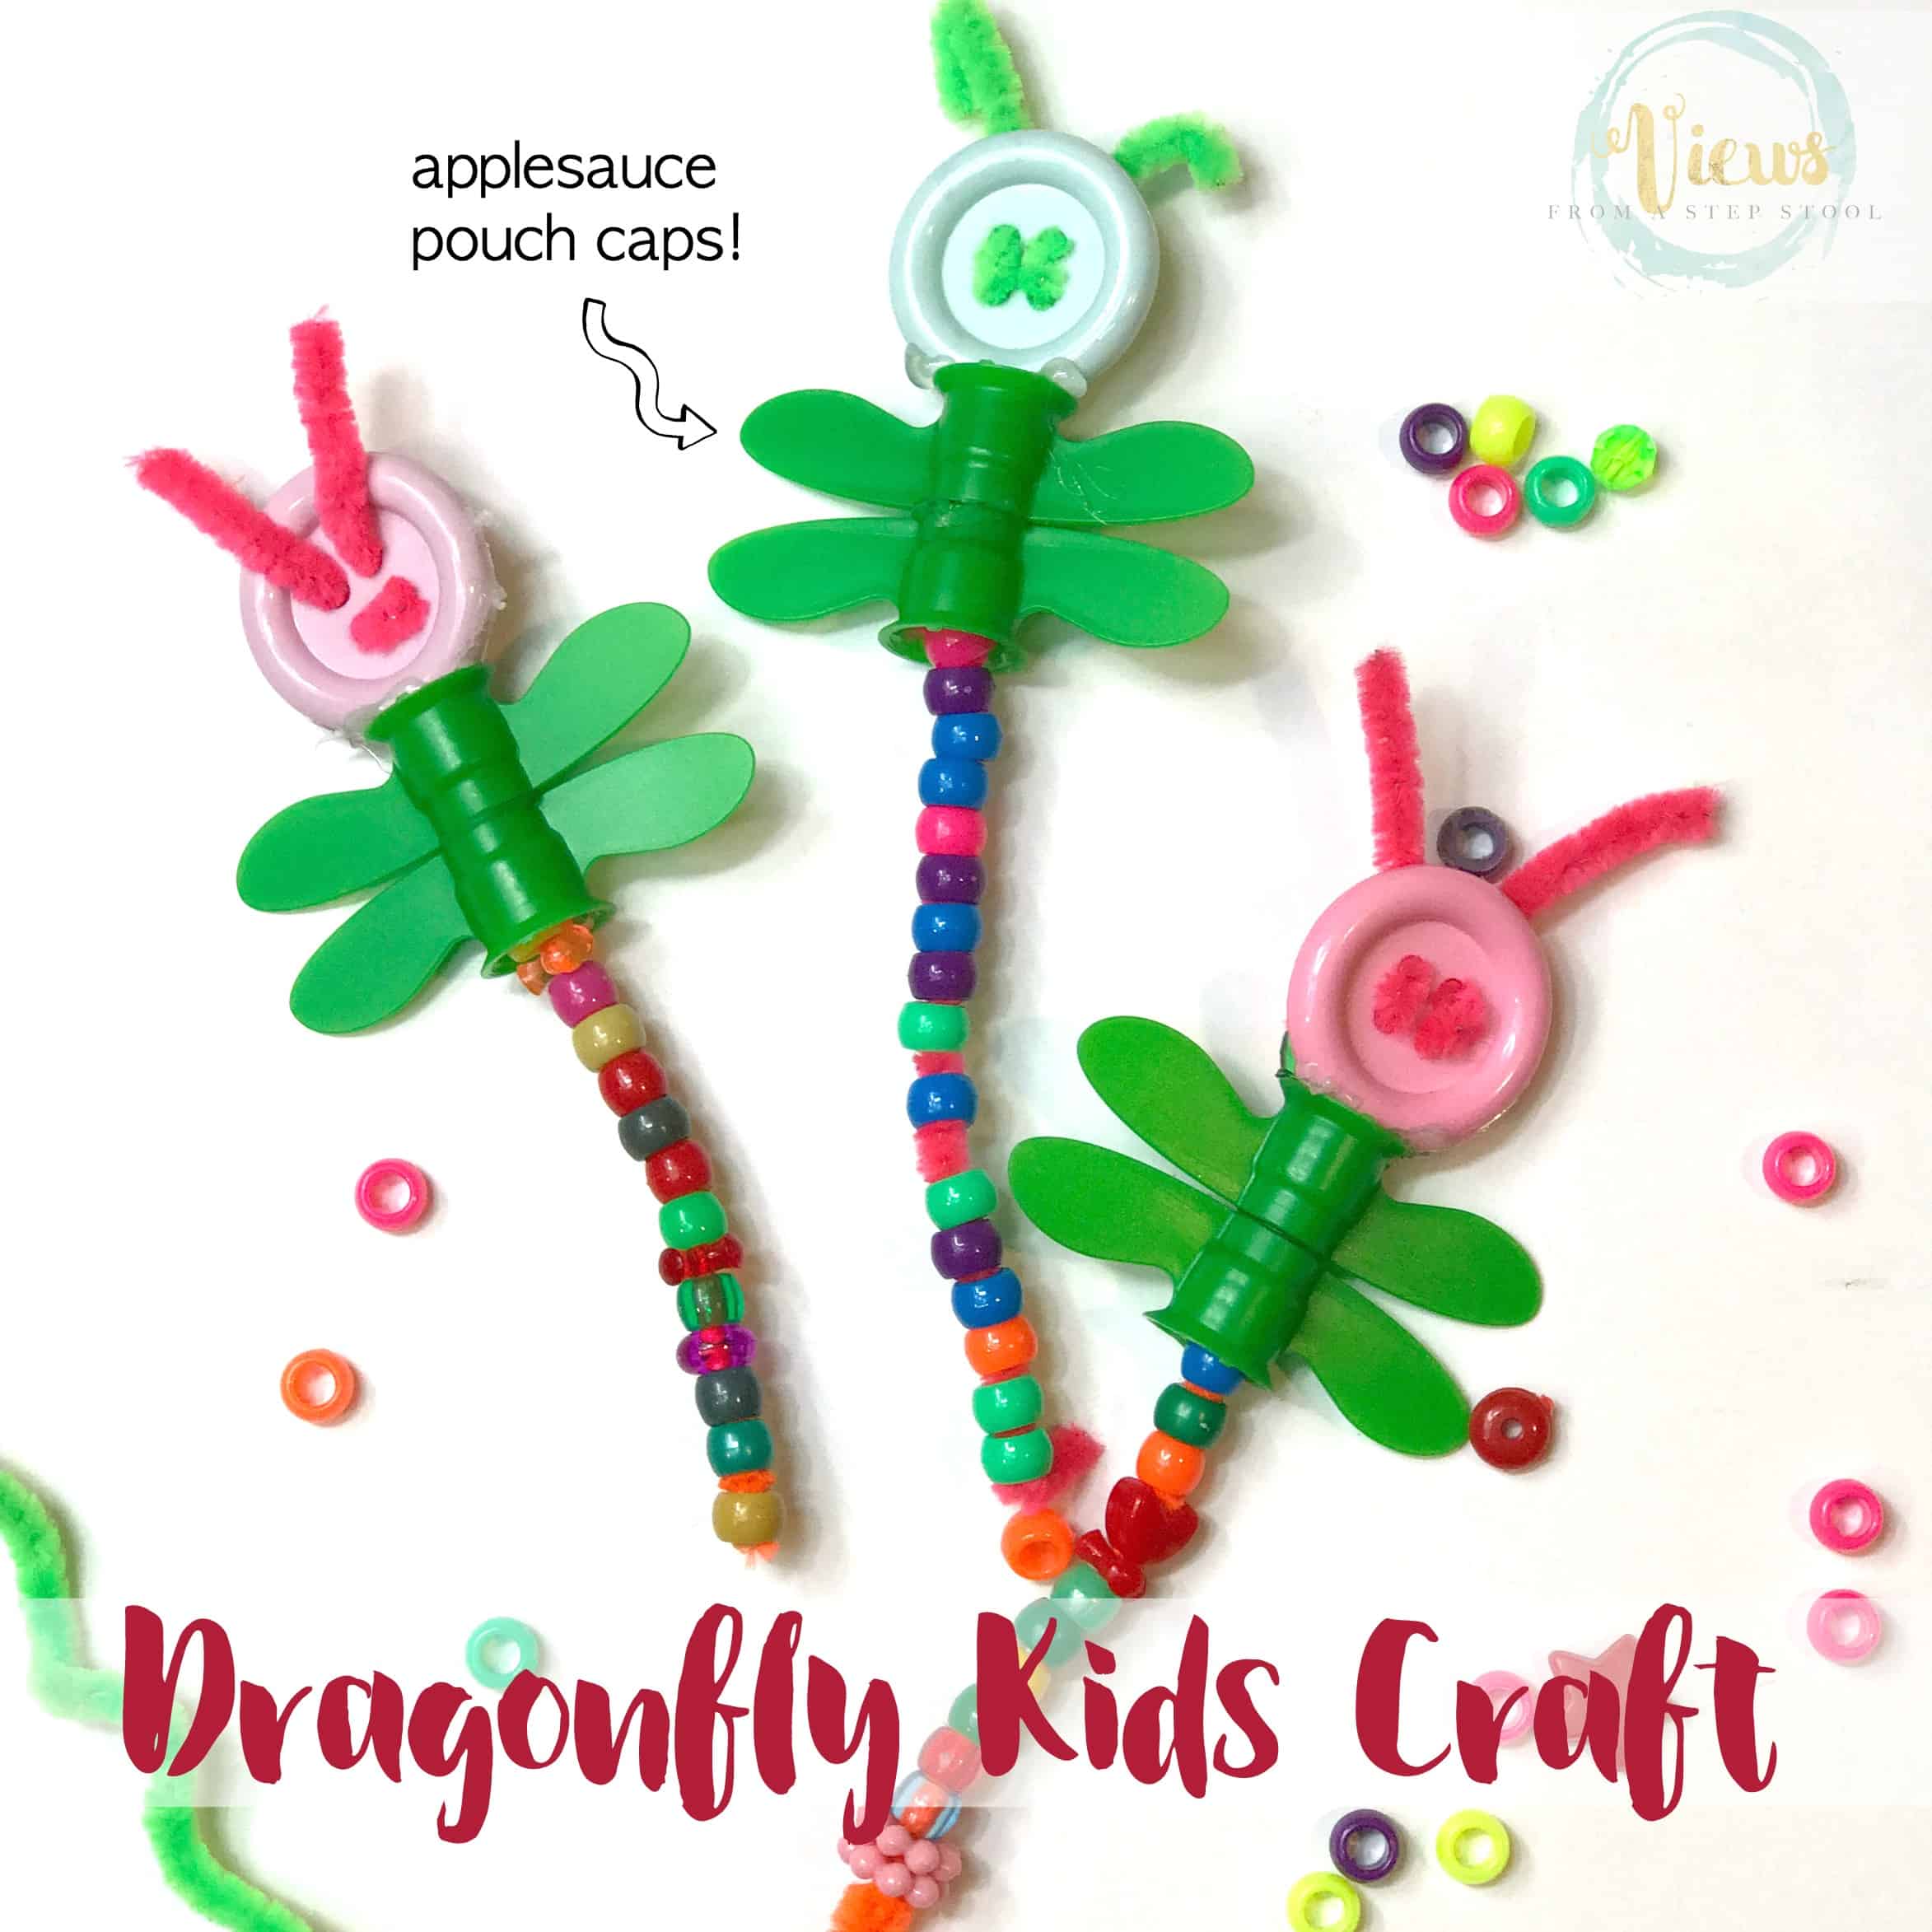 Use applesauce pouch caps to create this cute dragonfly kids craft! A fun upcycled fine motor activities for kids of many ages.